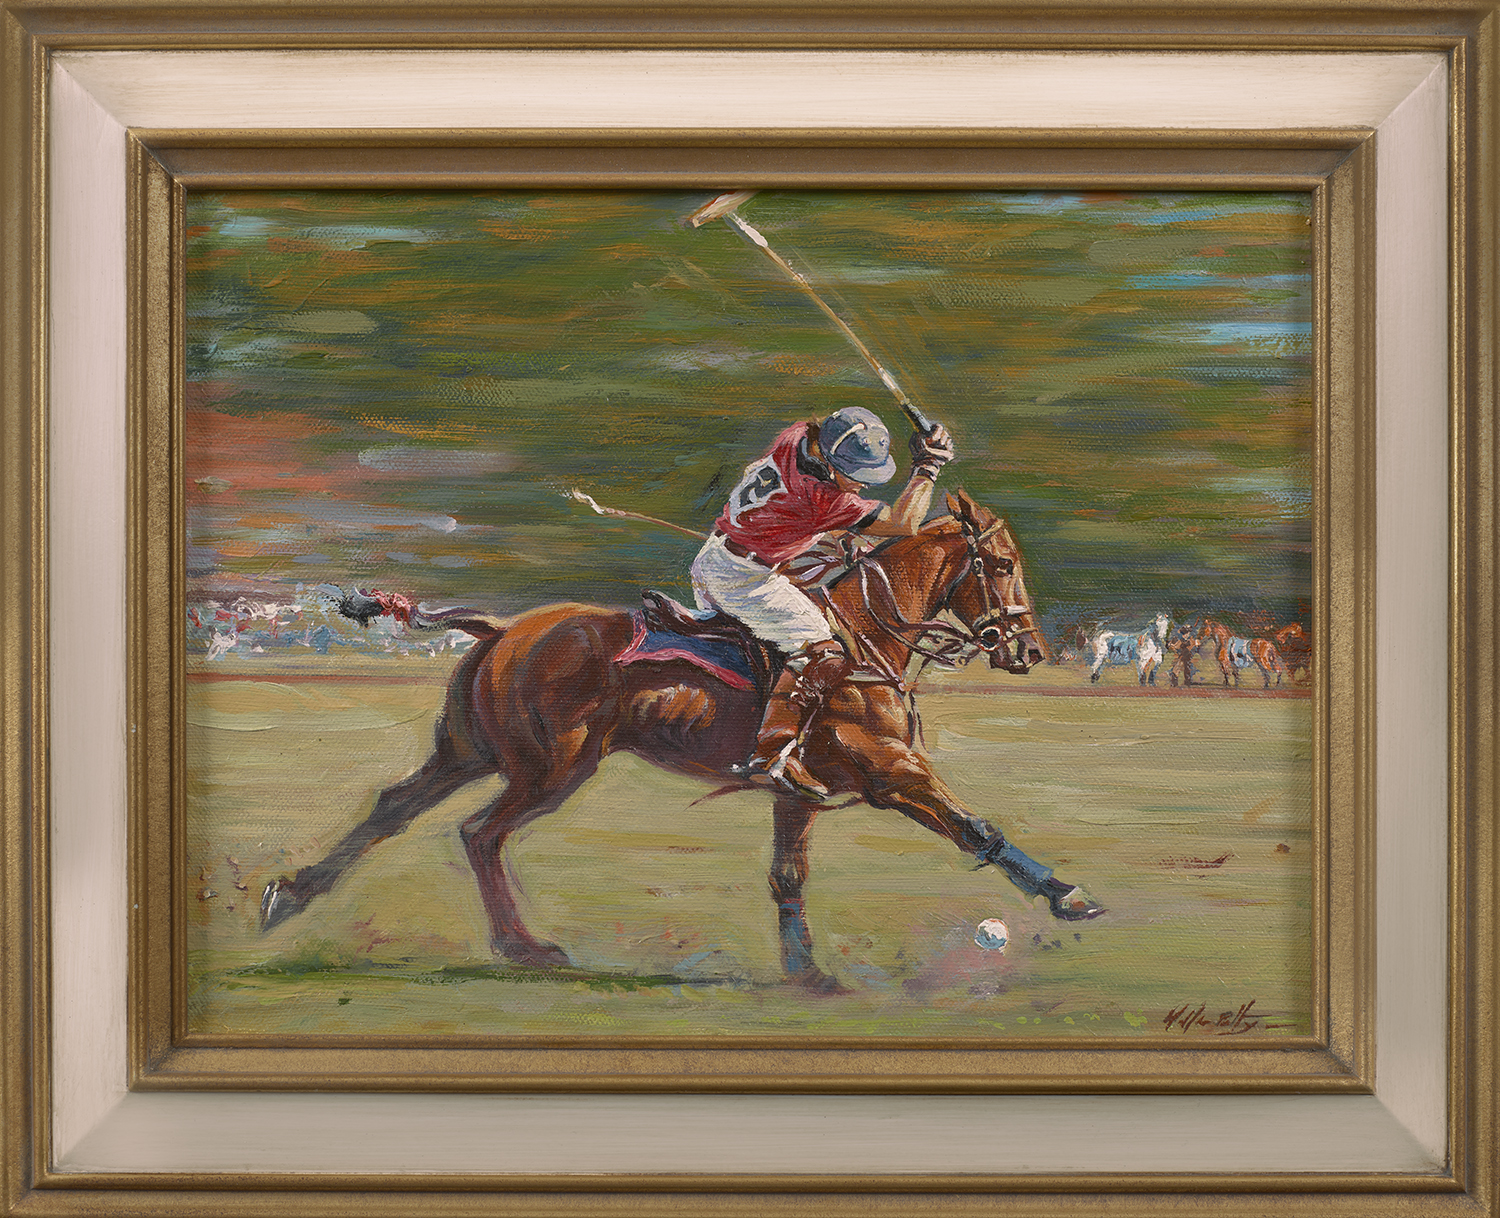 Polo Action #1 - Petty William